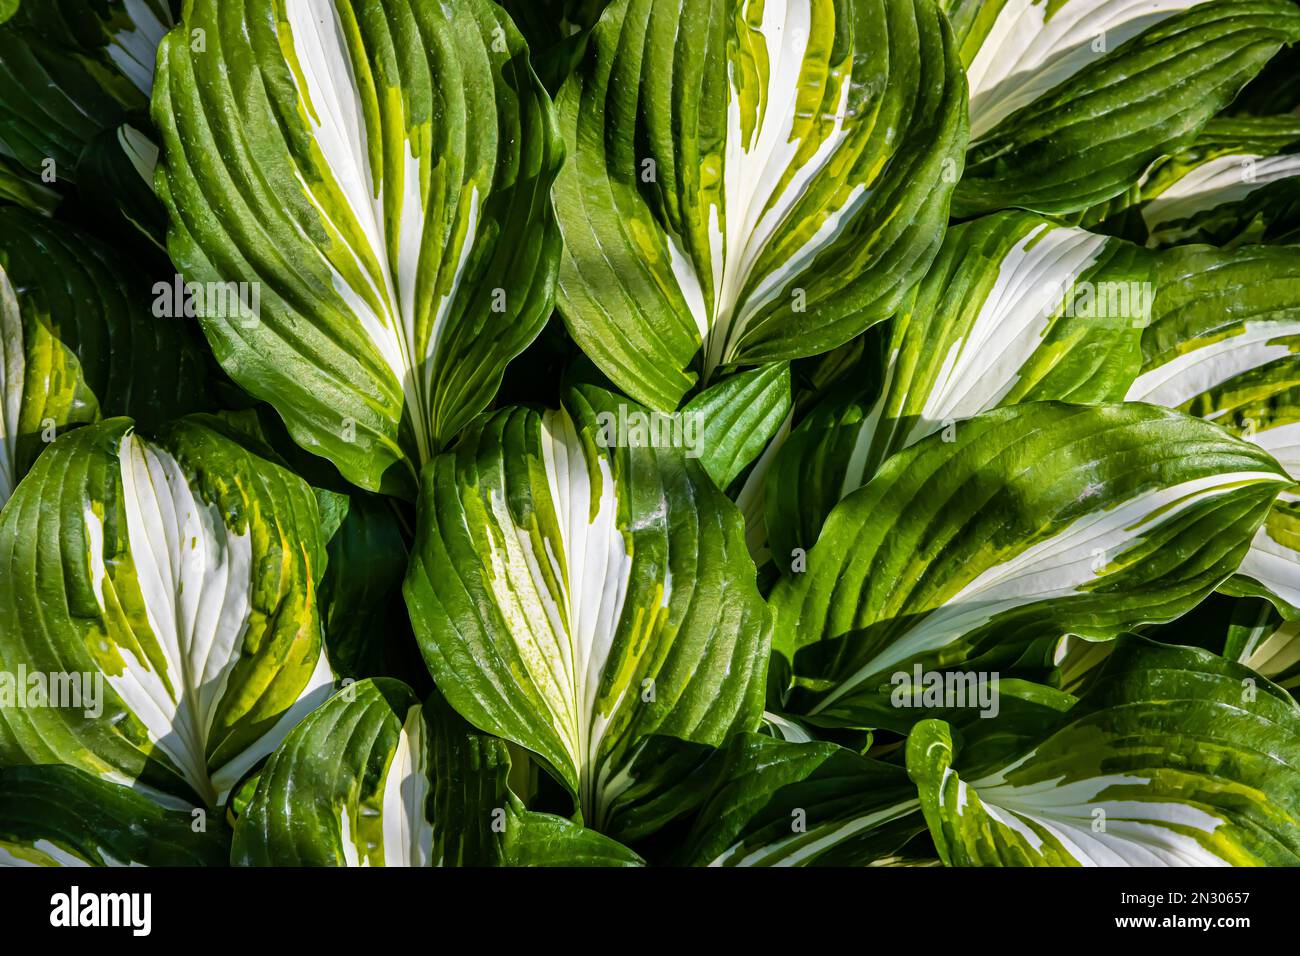 green leaves of plants in the garden. texture Stock Photo